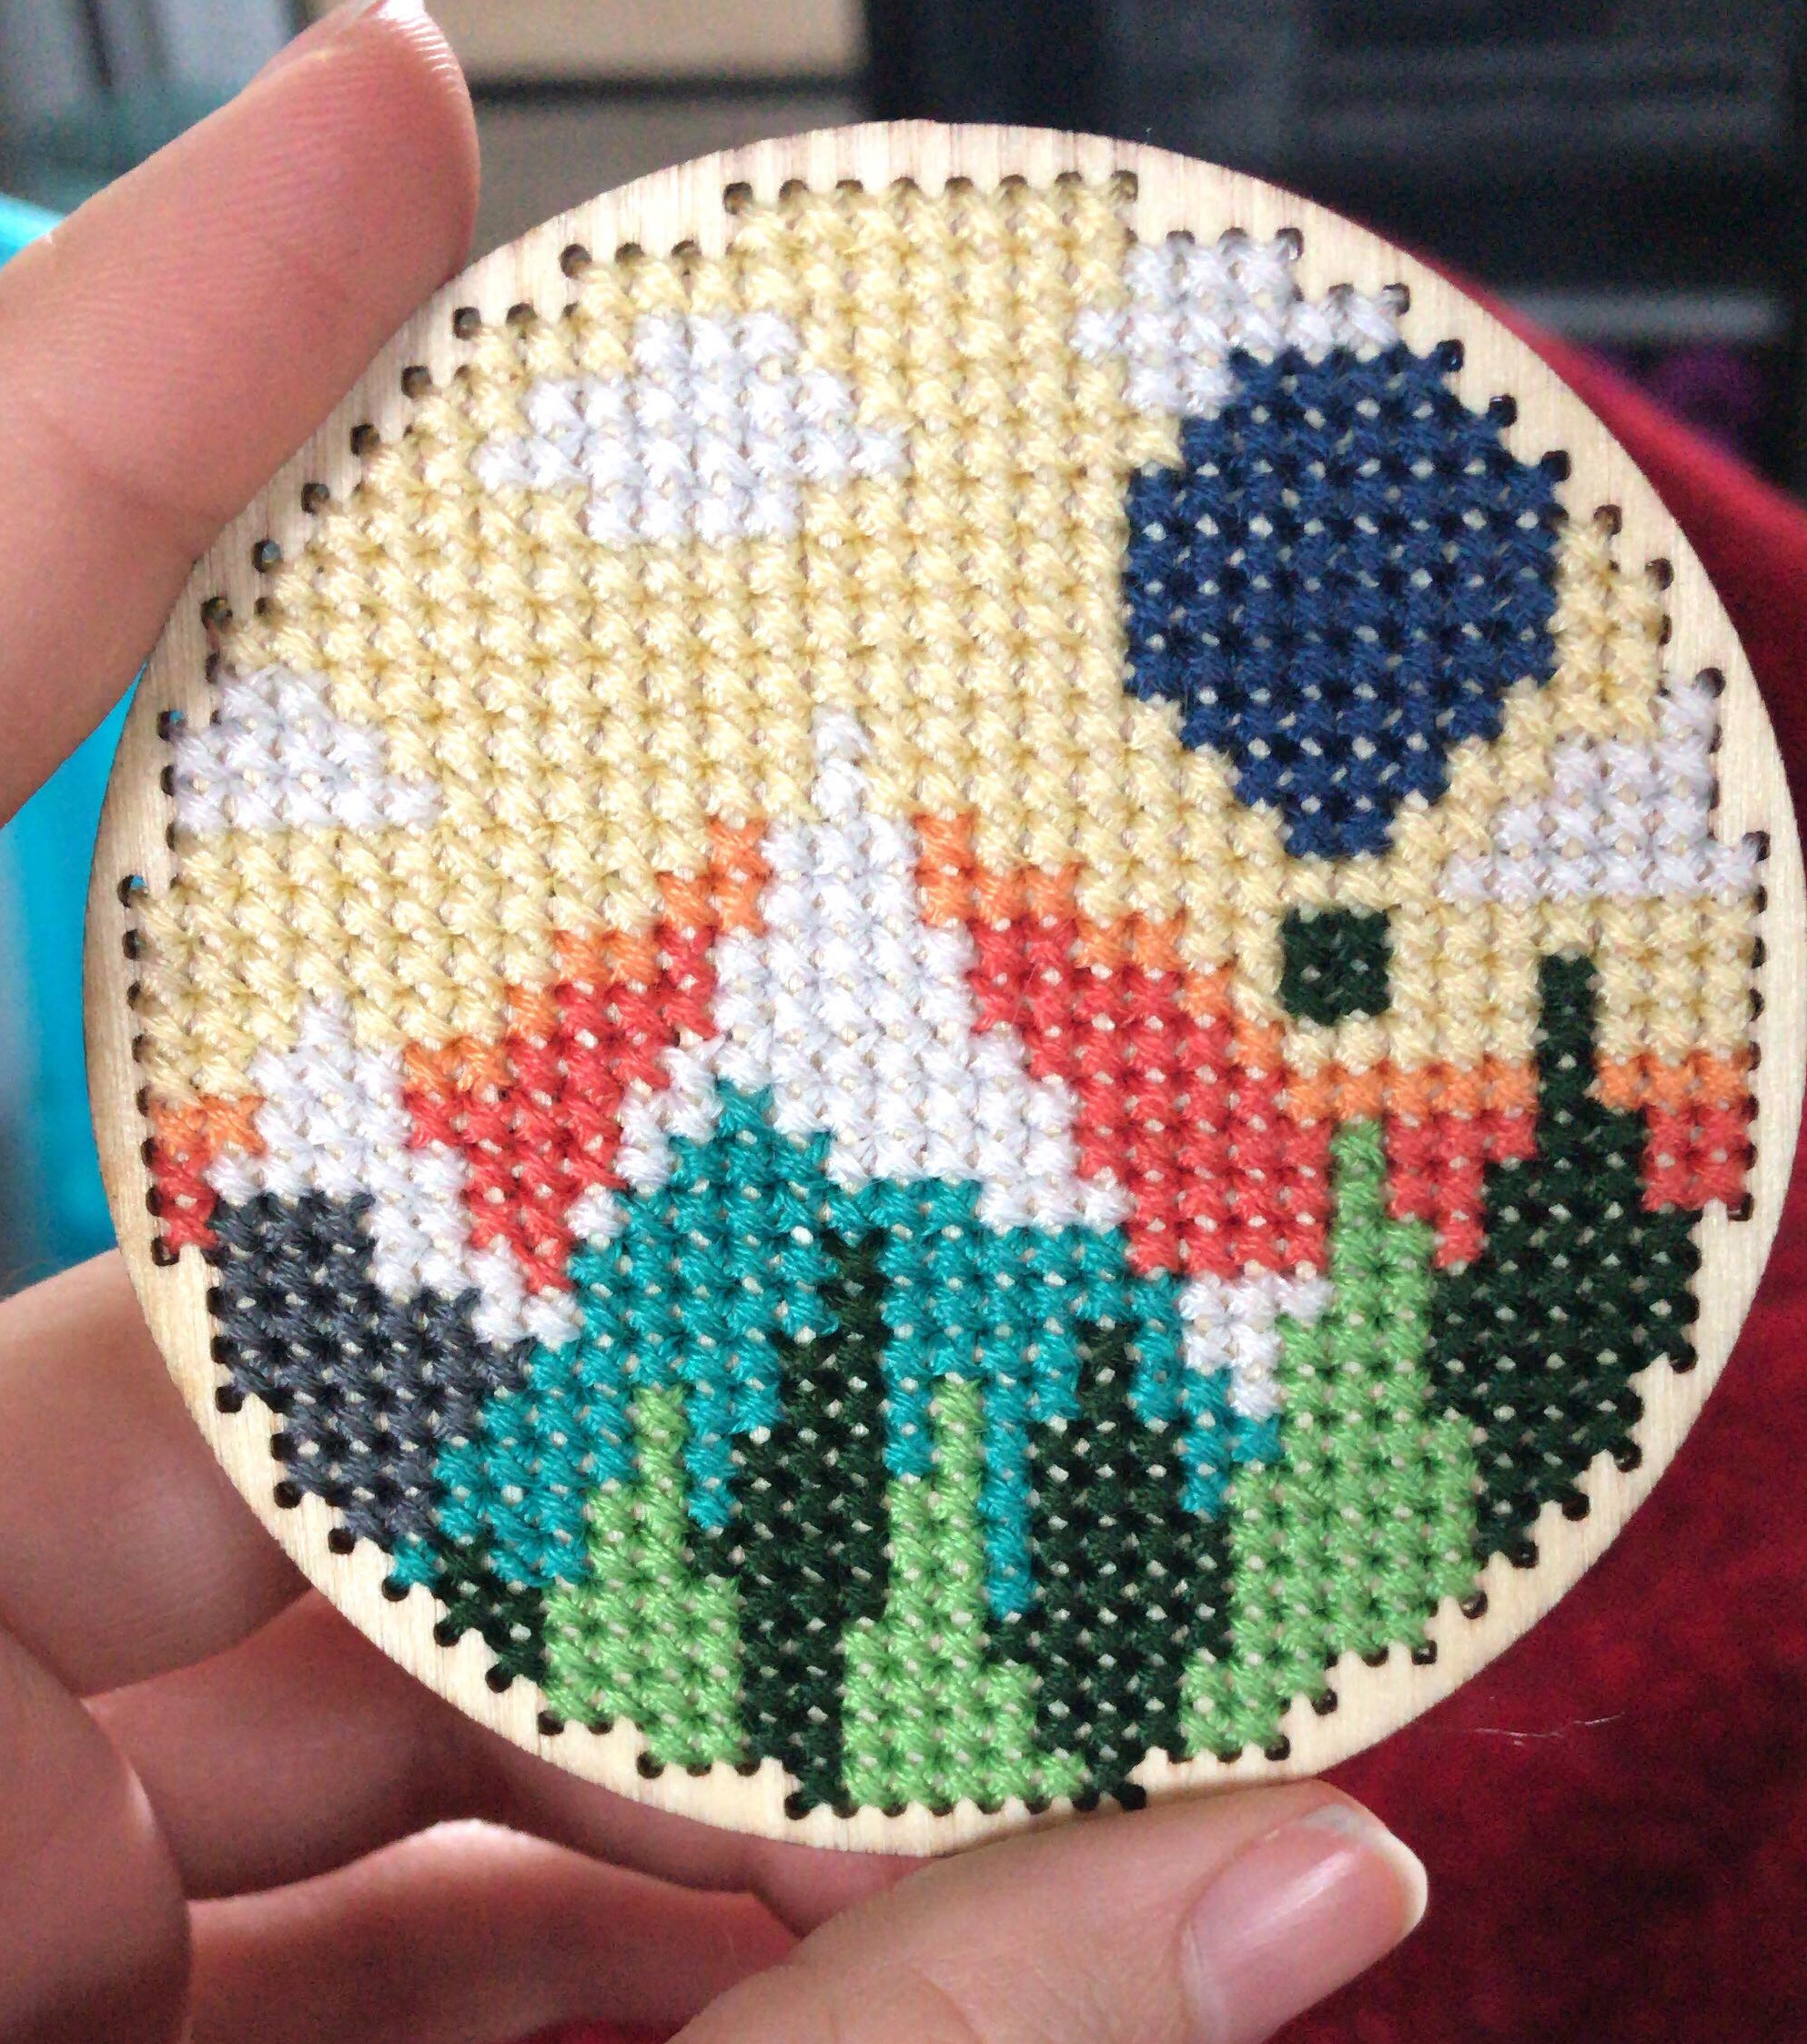 A cross stitch on a circular piece of wood of a mountain landscape with a sun